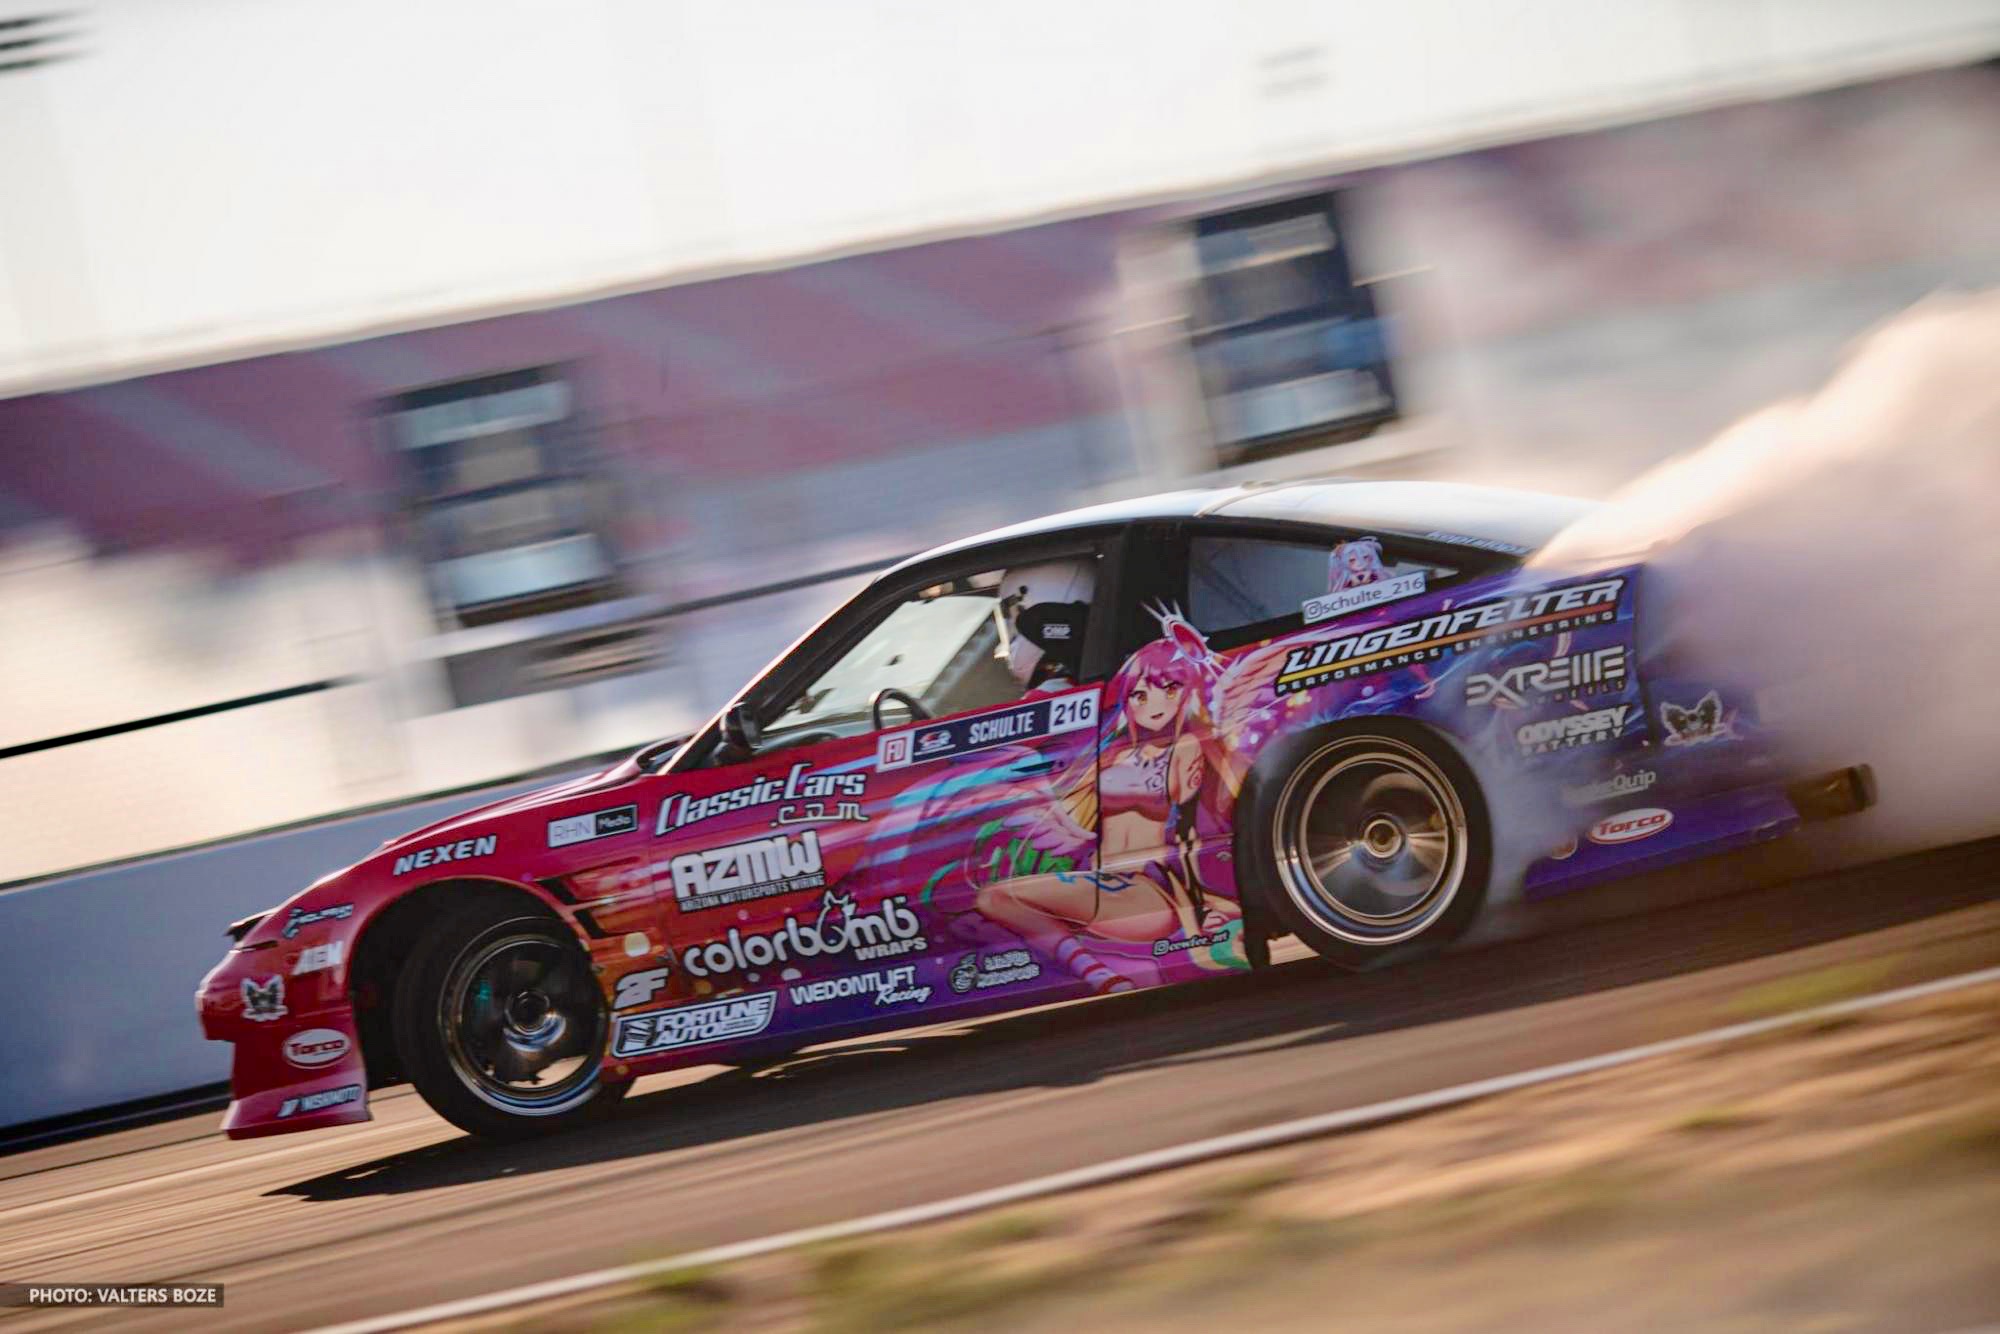 Sponsored driver Andrew Schulte | Photo by Valters Boze